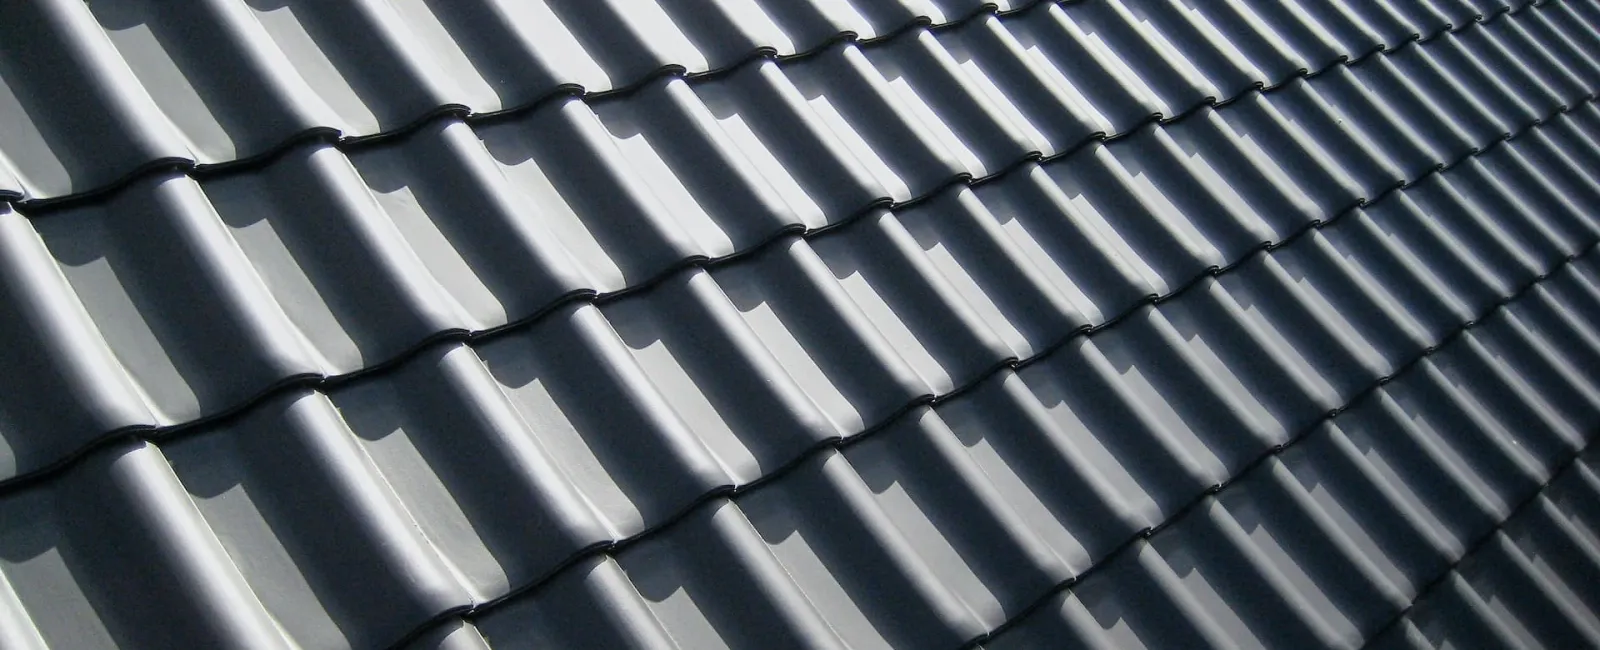 Why You Should Invest in Metal Roofing for Your Home